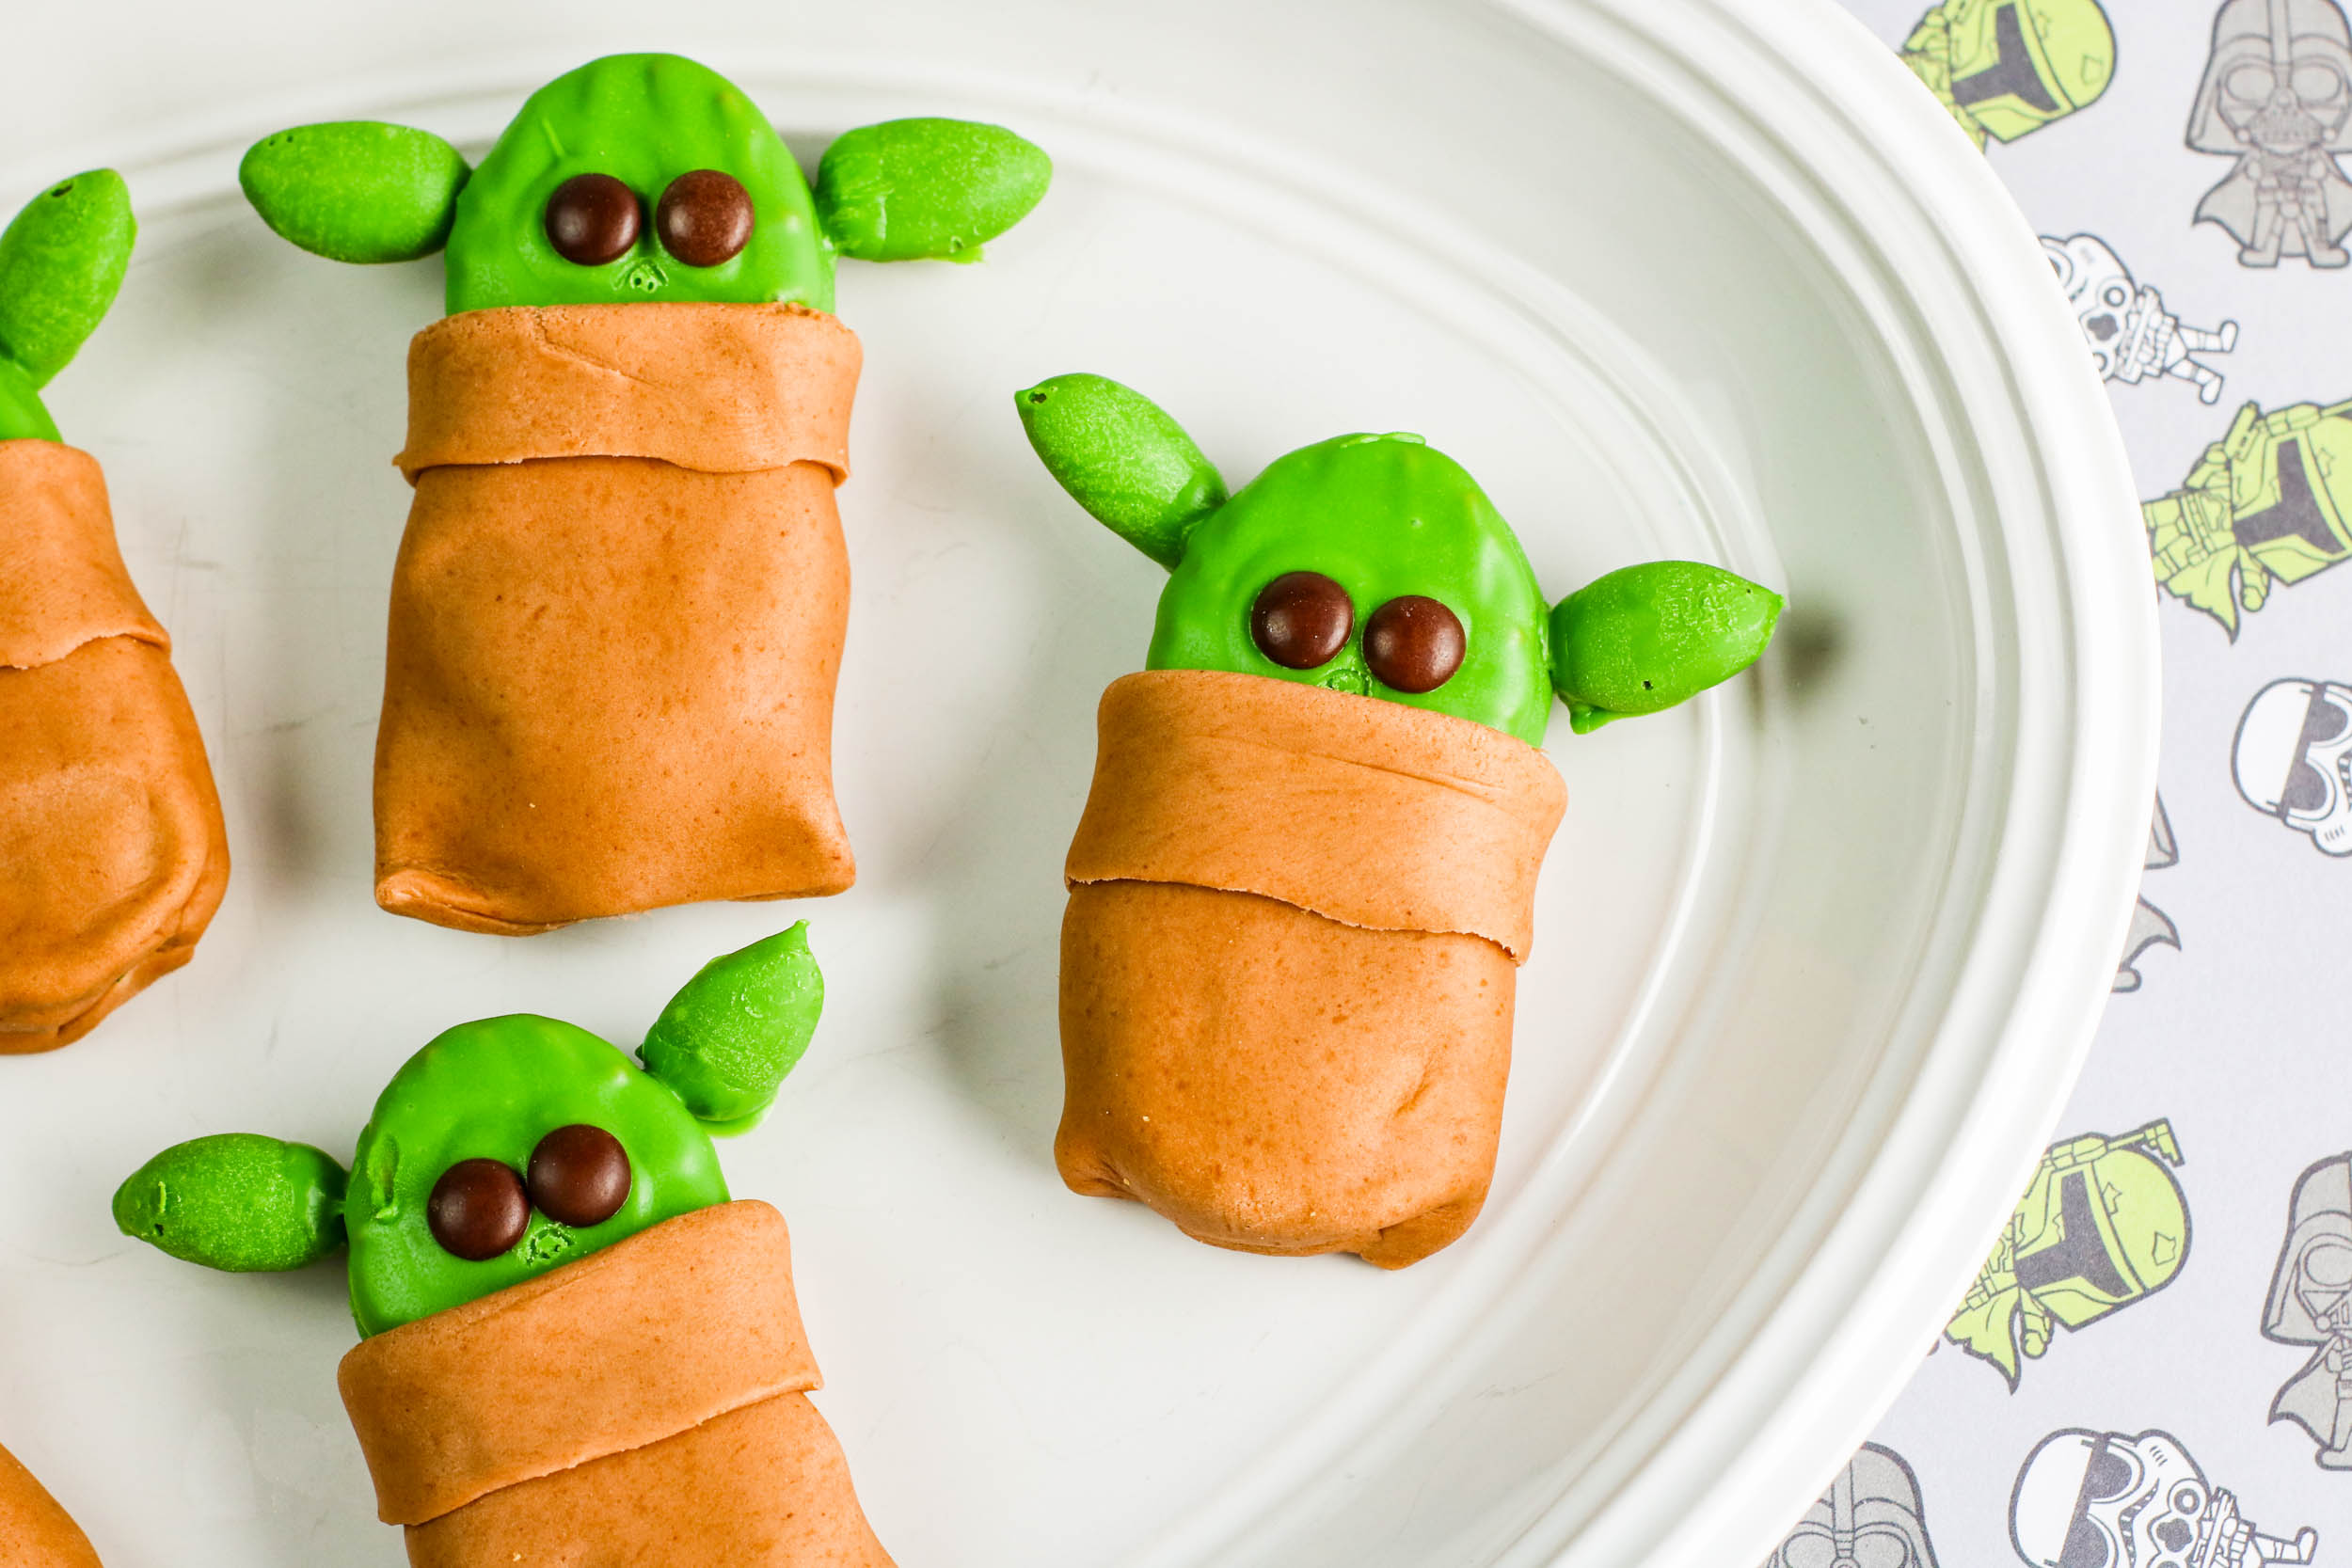 How to Make Baby Yoda Nutter Butters Cookies